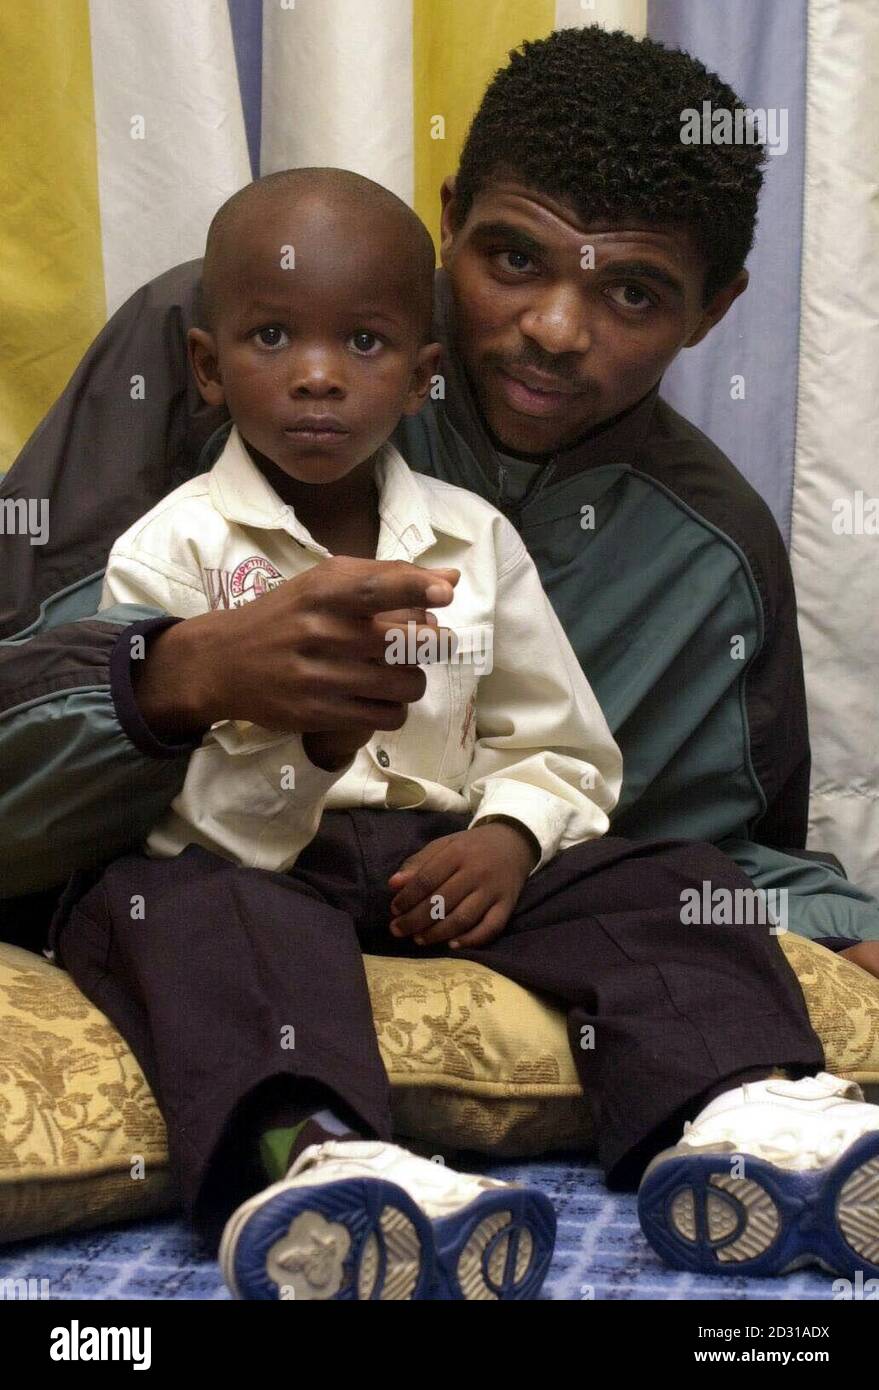 Arsenal soccer star Nwankwo Kanu meets four-year-old Tofunmi Okude during a press conference in London. Tofunmi was flown over from Nigeria for a livesaving heart operation, made possible through Kanu's Heart Foundation. Stock Photo